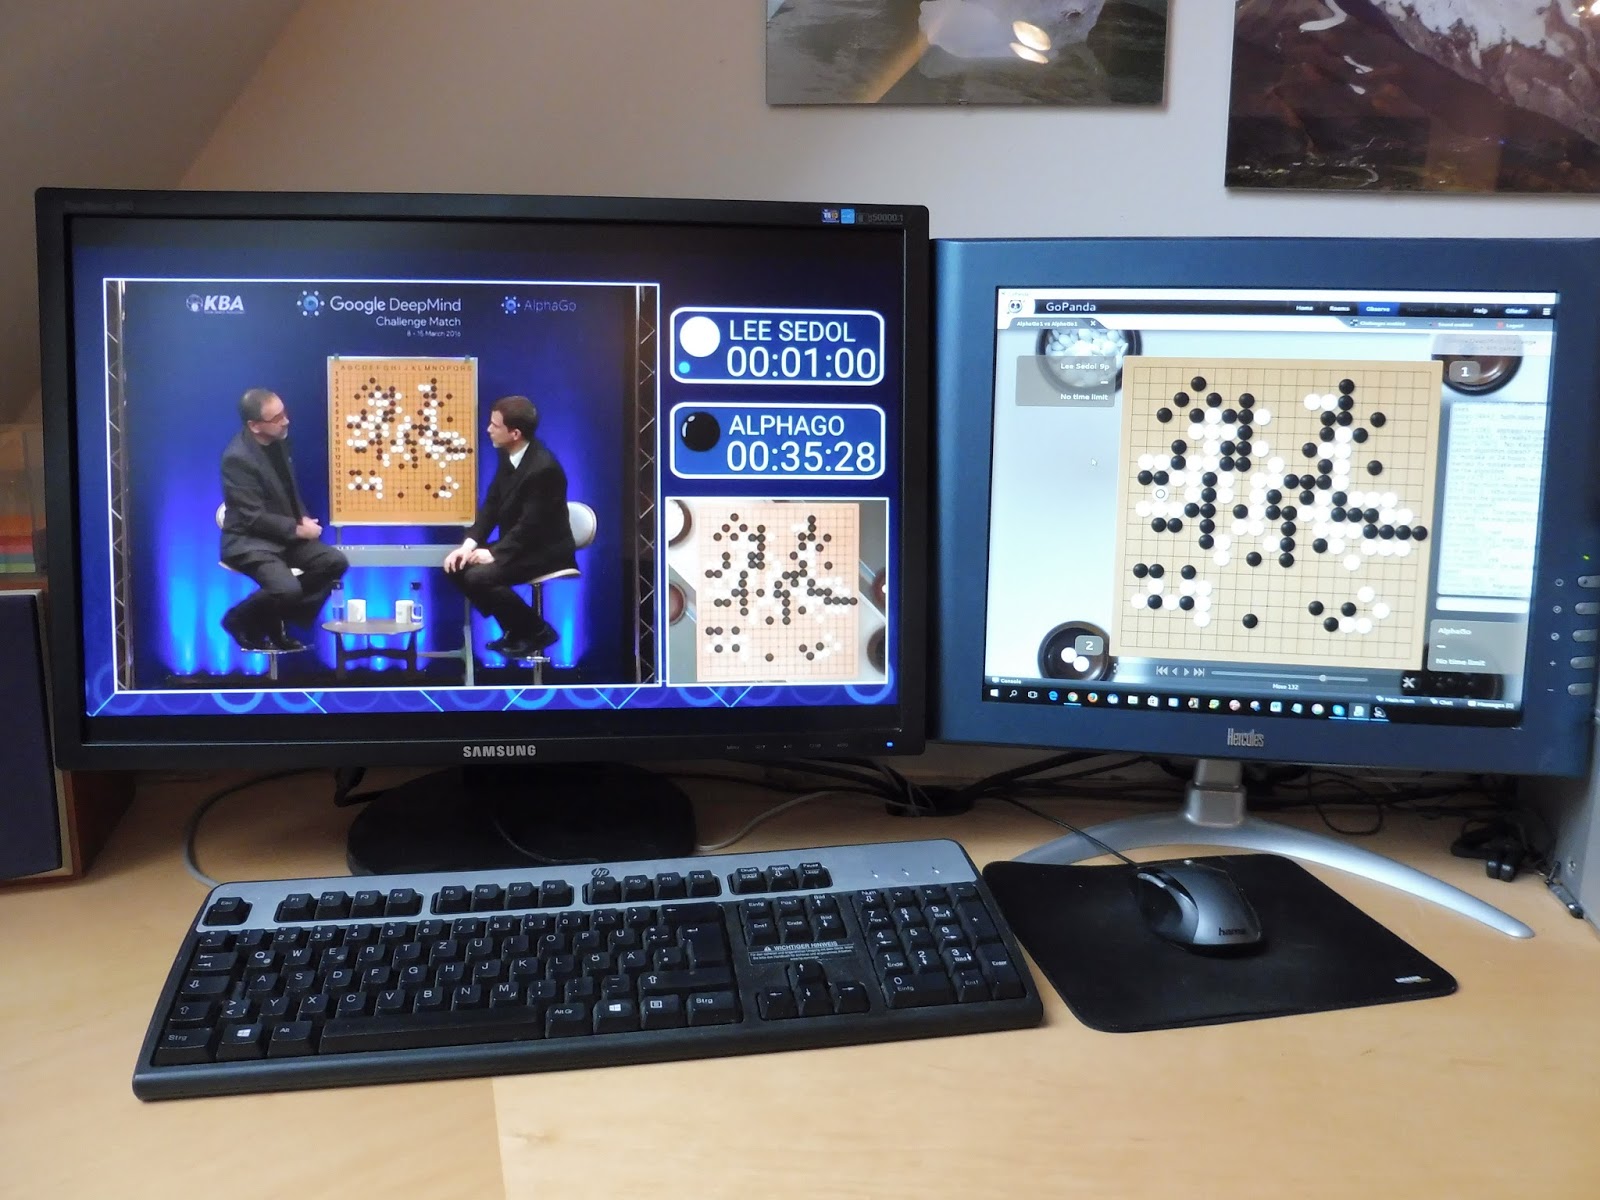 13 3 2016 Following live the 4th game 0 1 in the AlphaGo Lee Sedol match at home